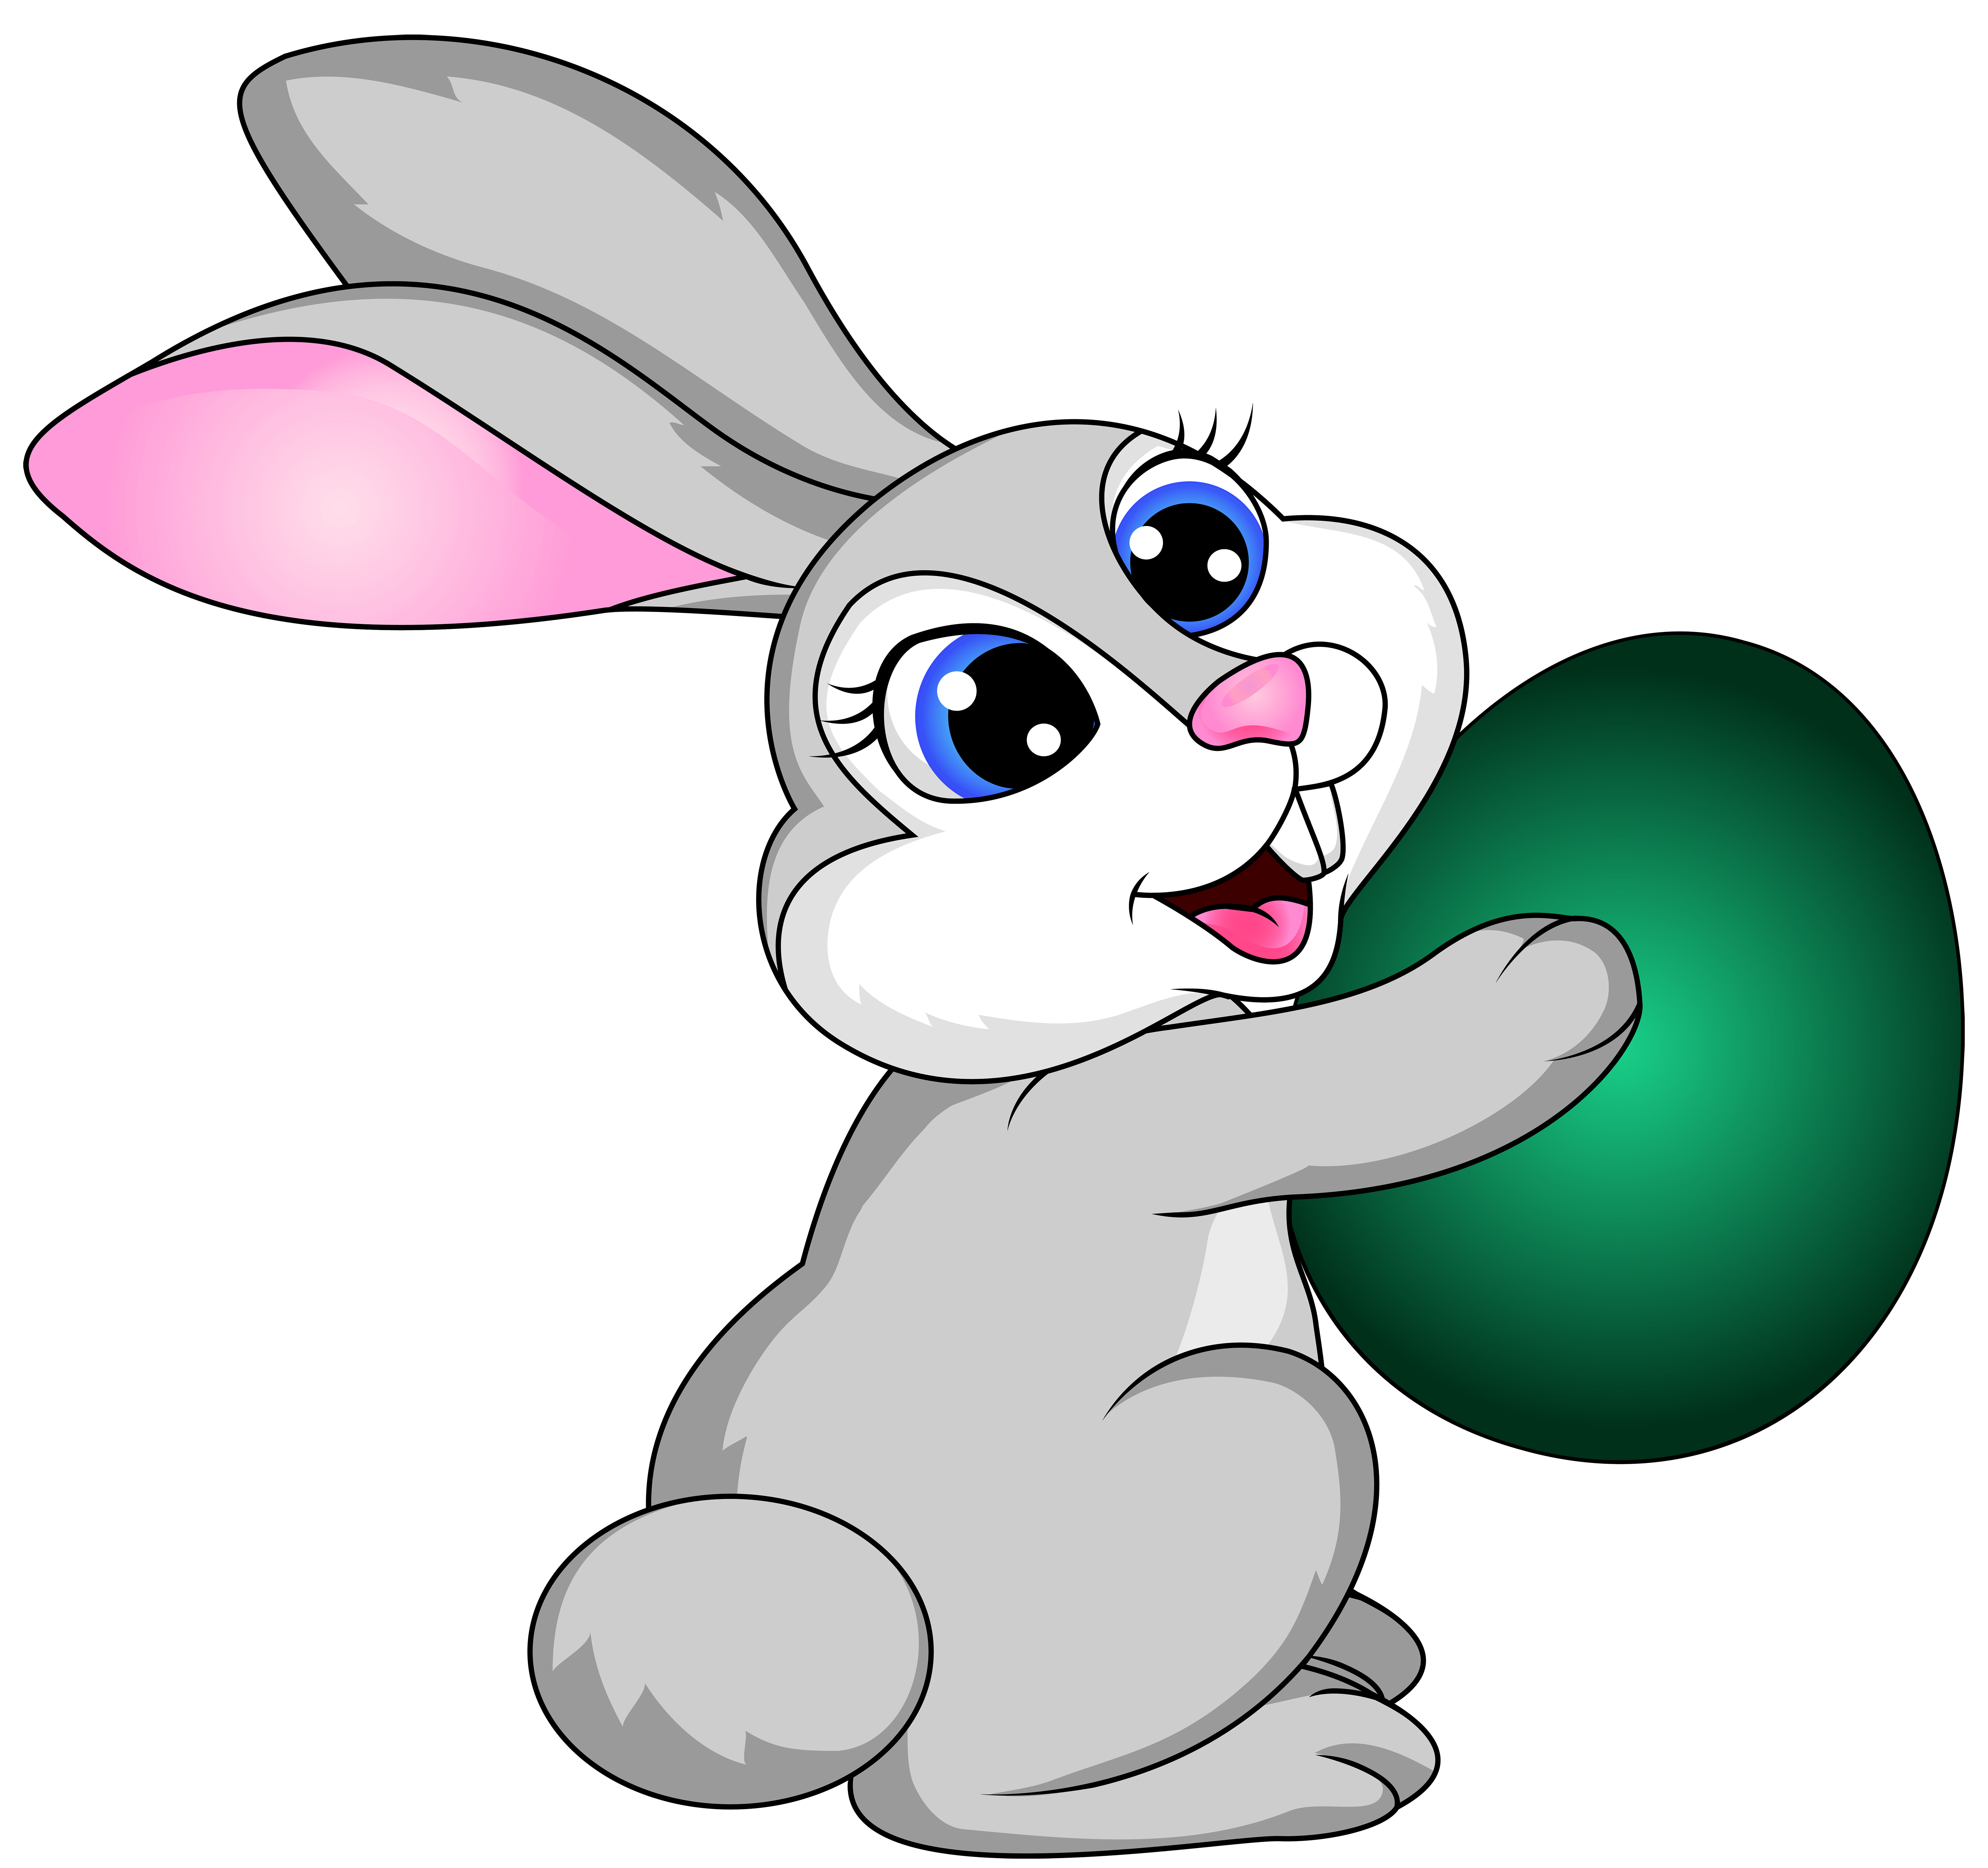 With Egg Easter Bunny Transparent Free HQ Image Clipart